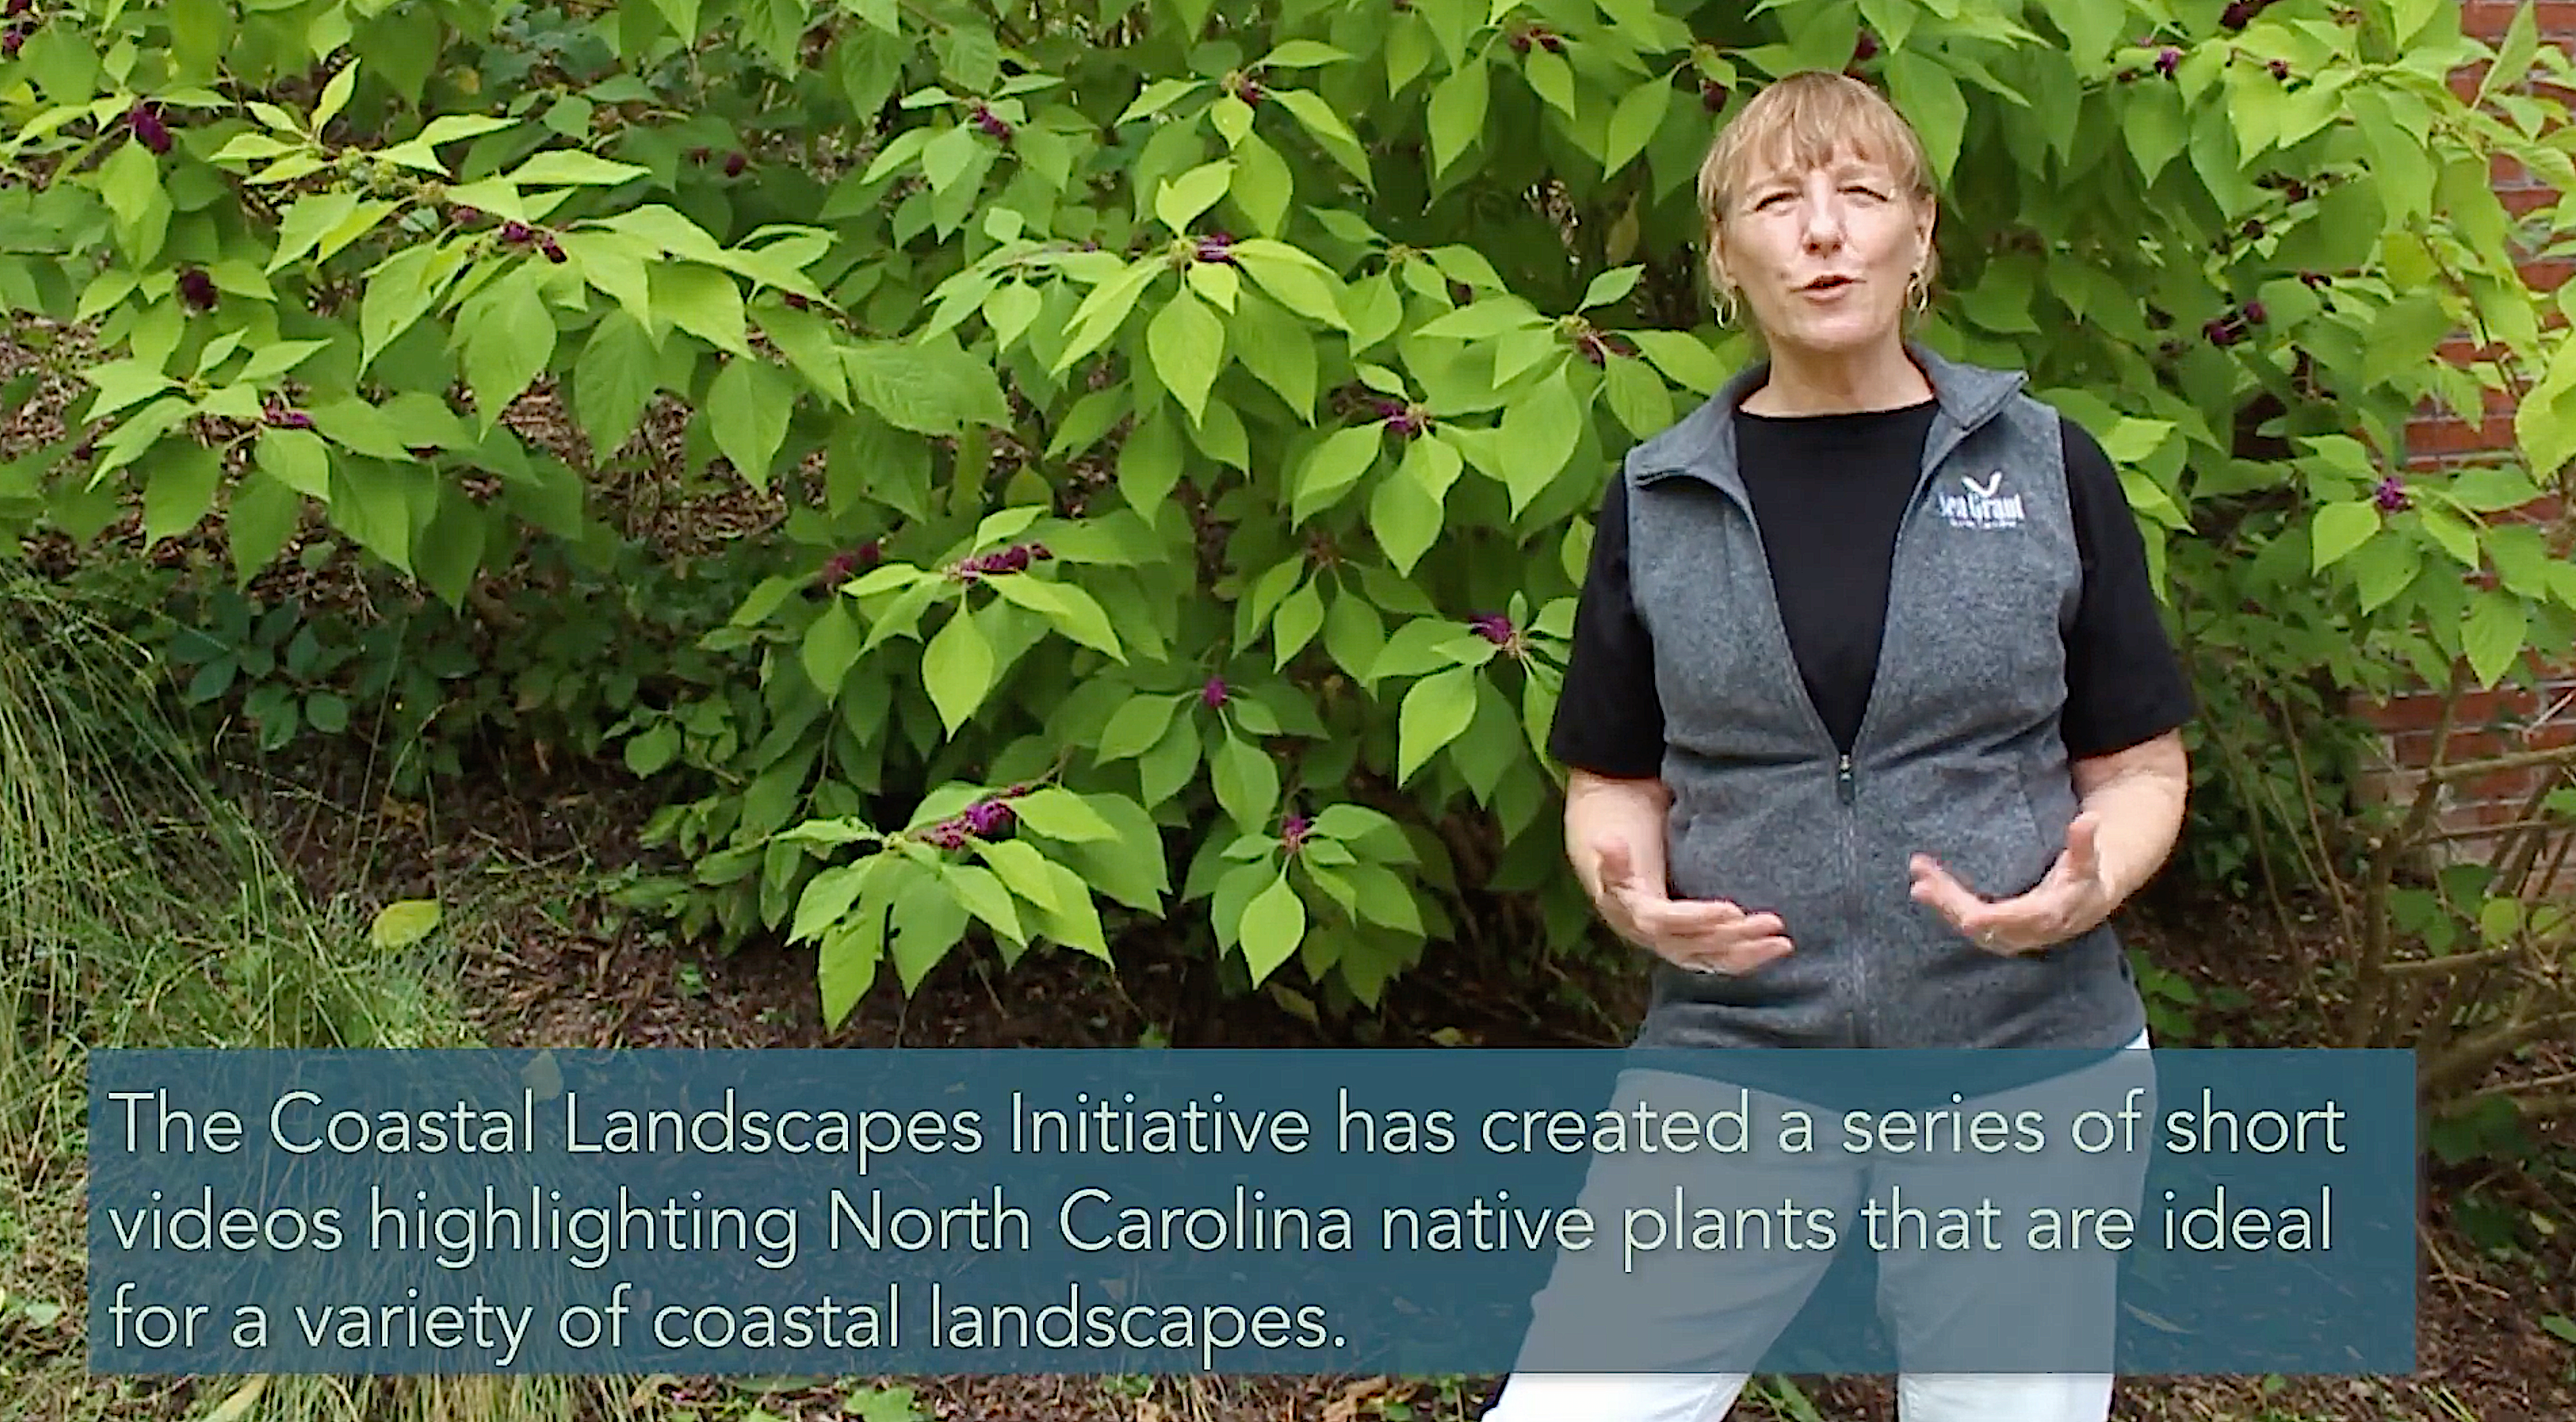 The CLI’s Gloria Putnam says using native plants makes for eco-friendly landscaping.